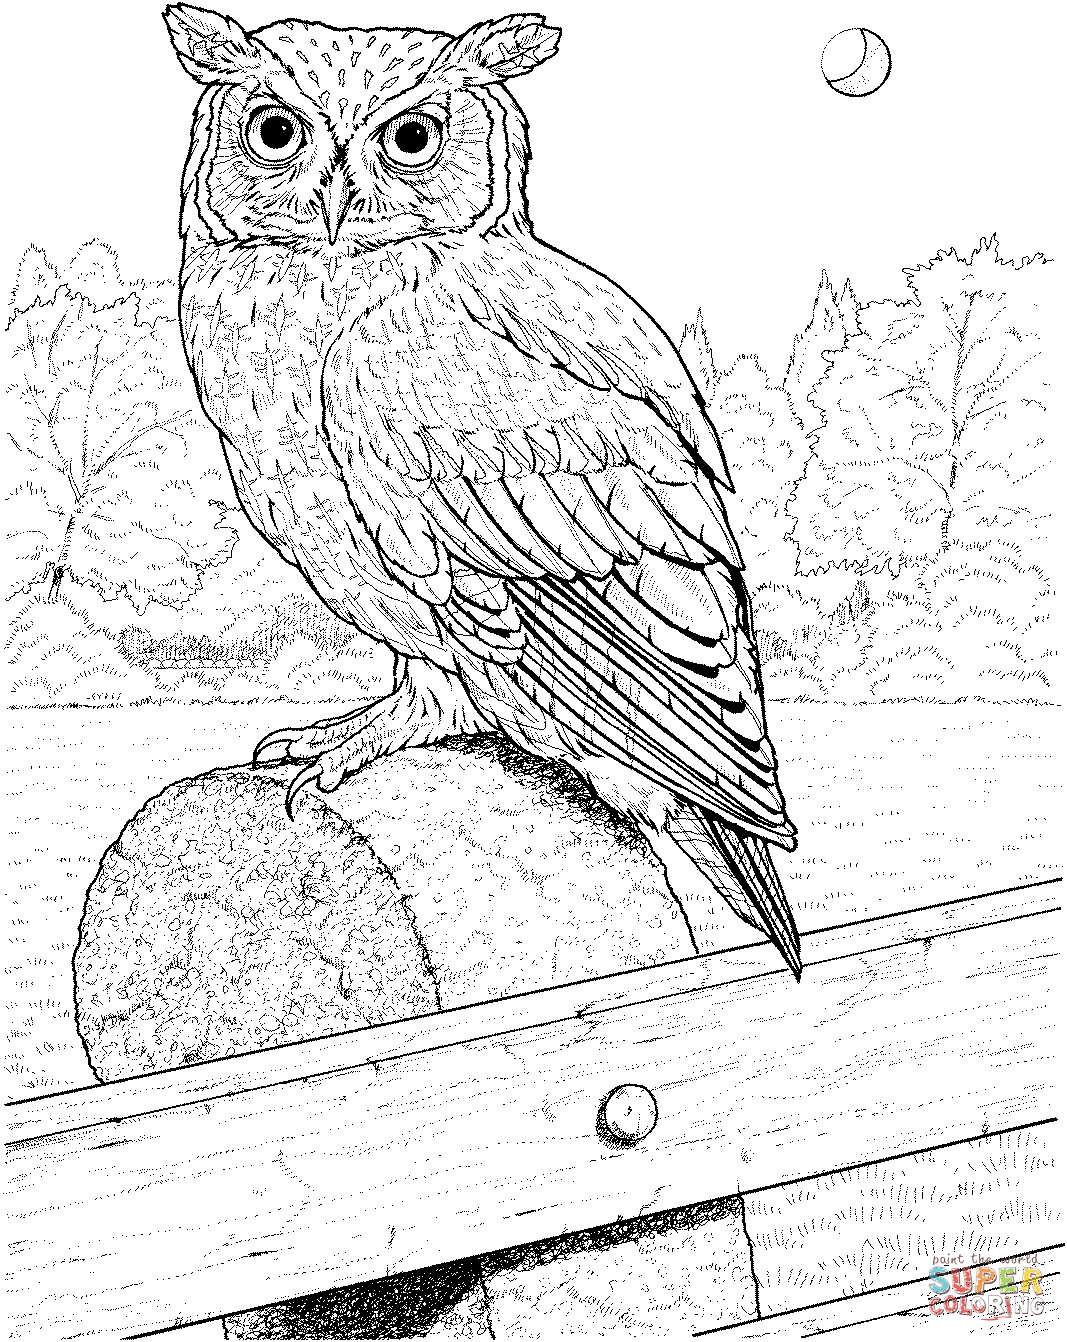 Horned Owl coloring #6, Download drawings